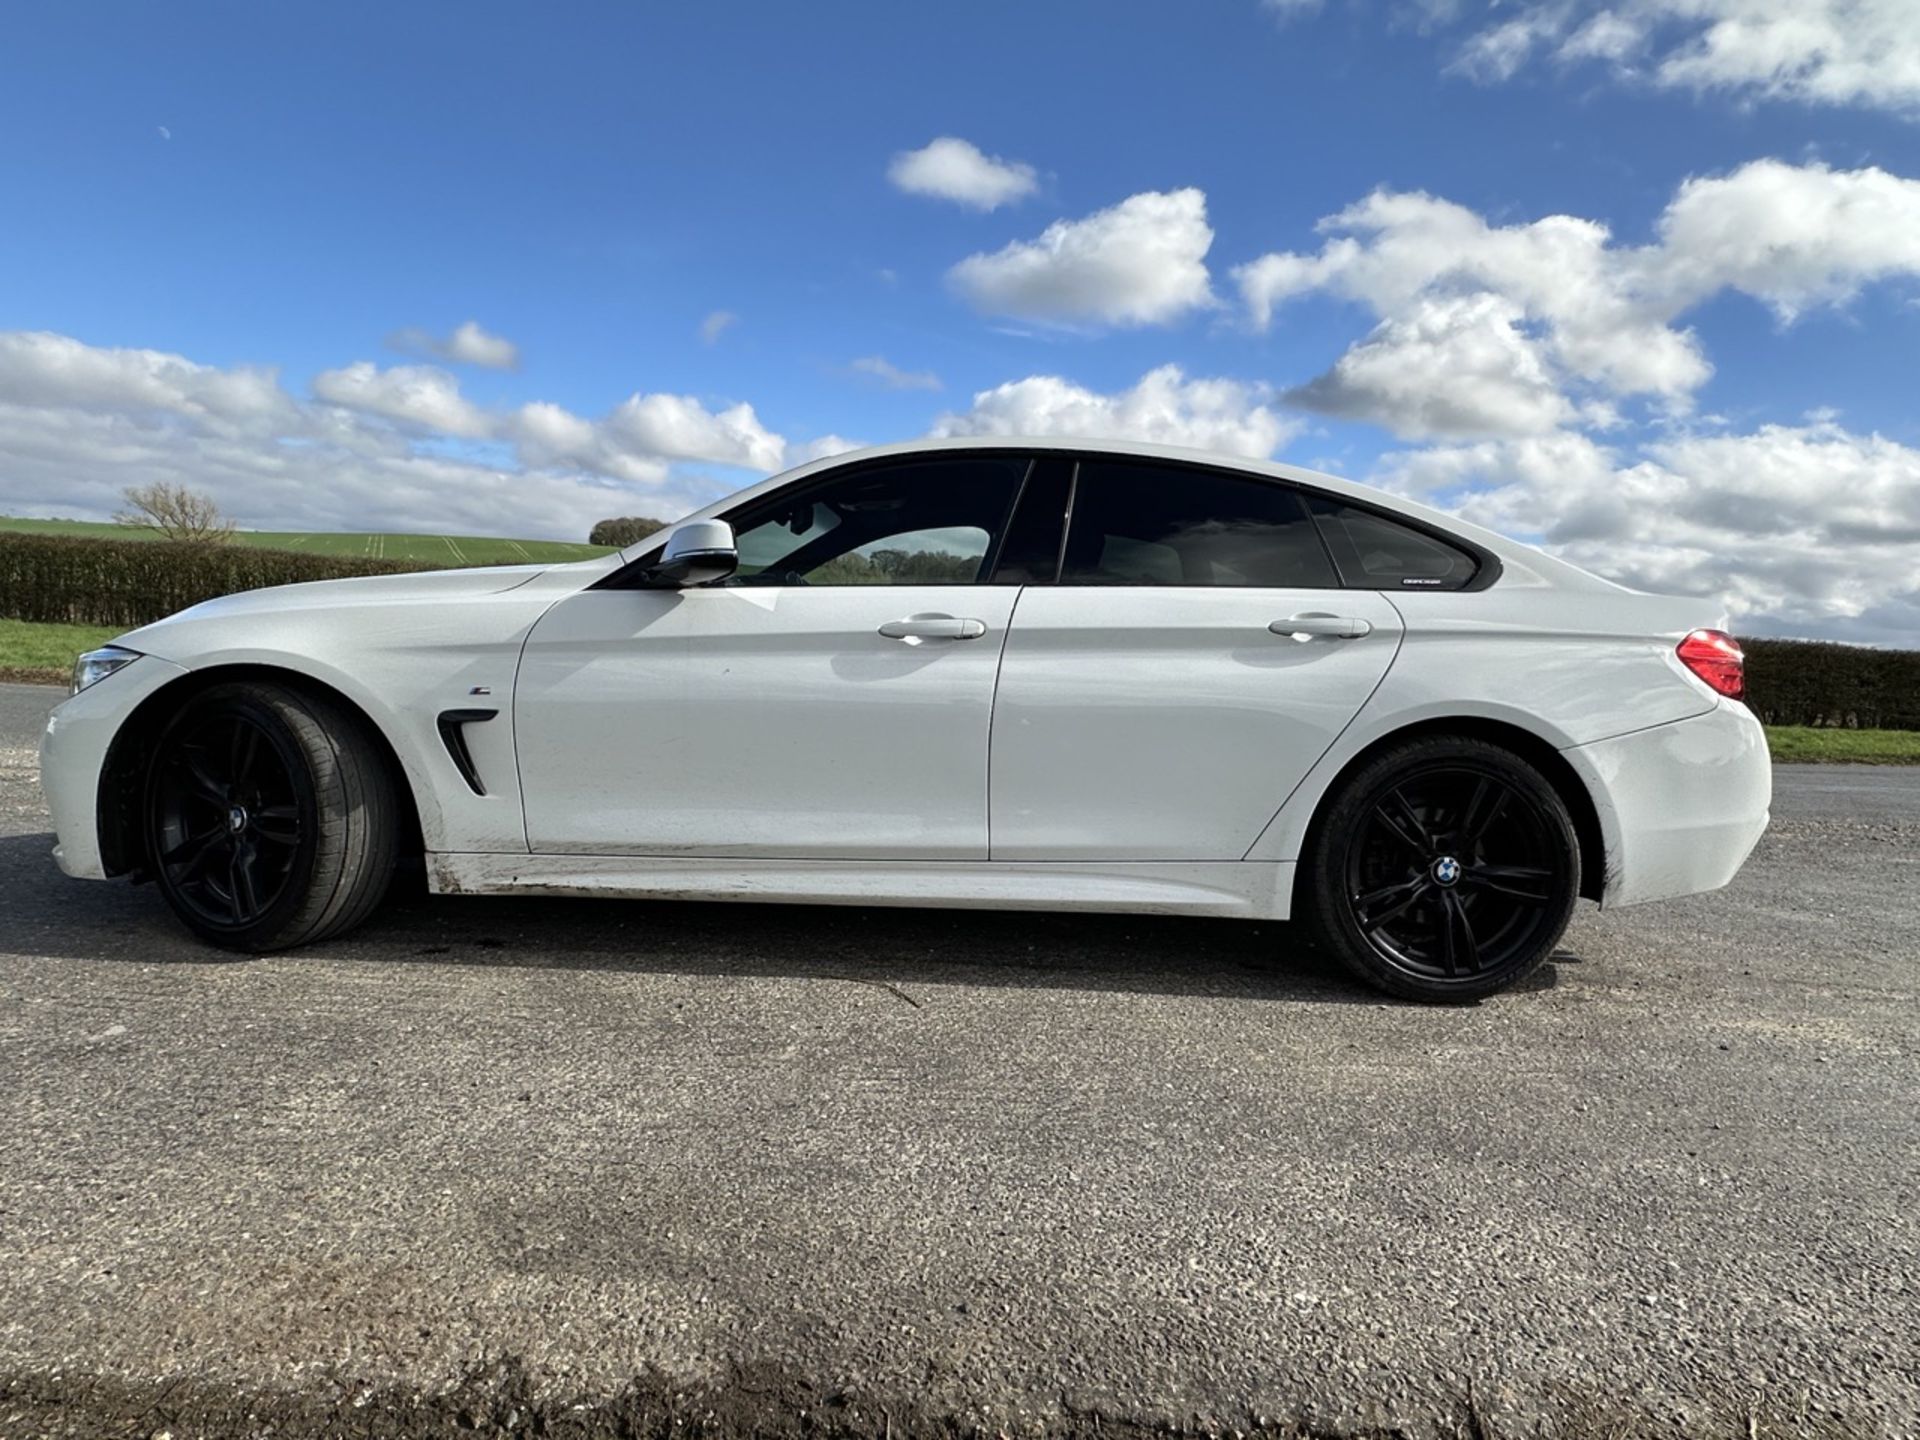 BMW 4 SERIES 420i M Sport 5dr [Professional Media] Manual - Petrol - 2.0 - Coupe- 54k miles - 2016 - Image 6 of 13